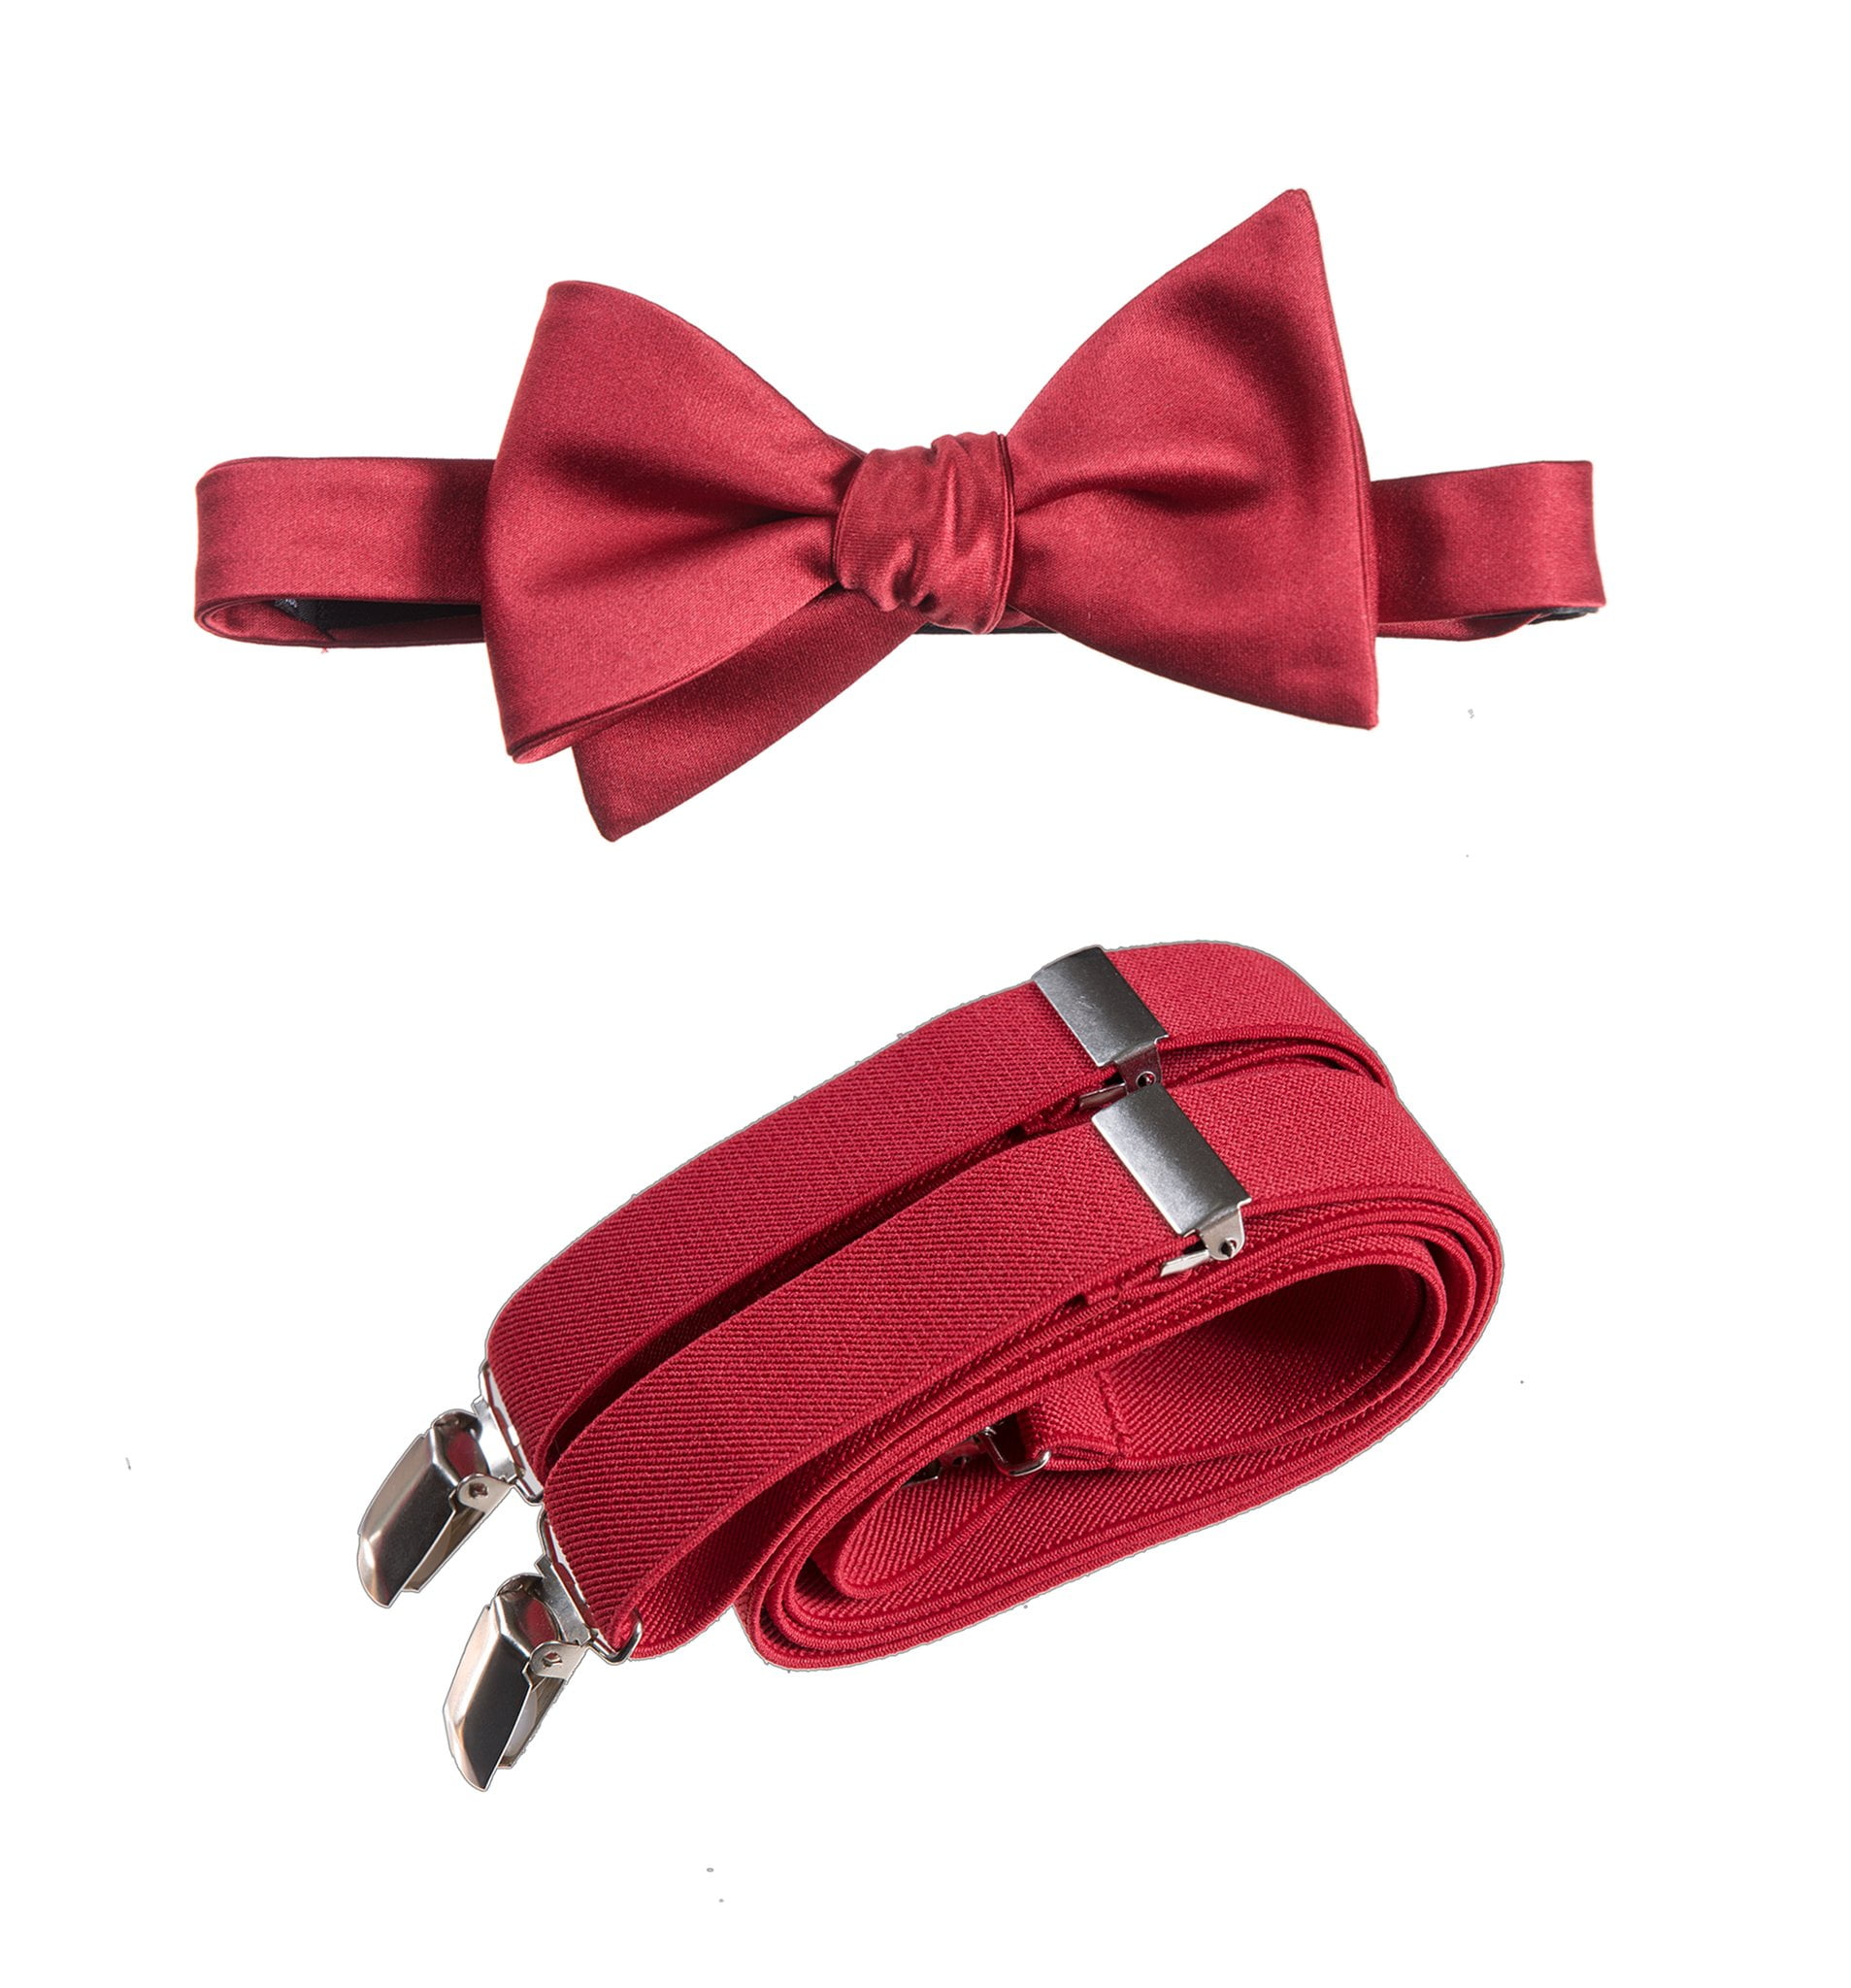 New in box men's self tied bowtie set solid 100% polyester wedding prom burgundy 